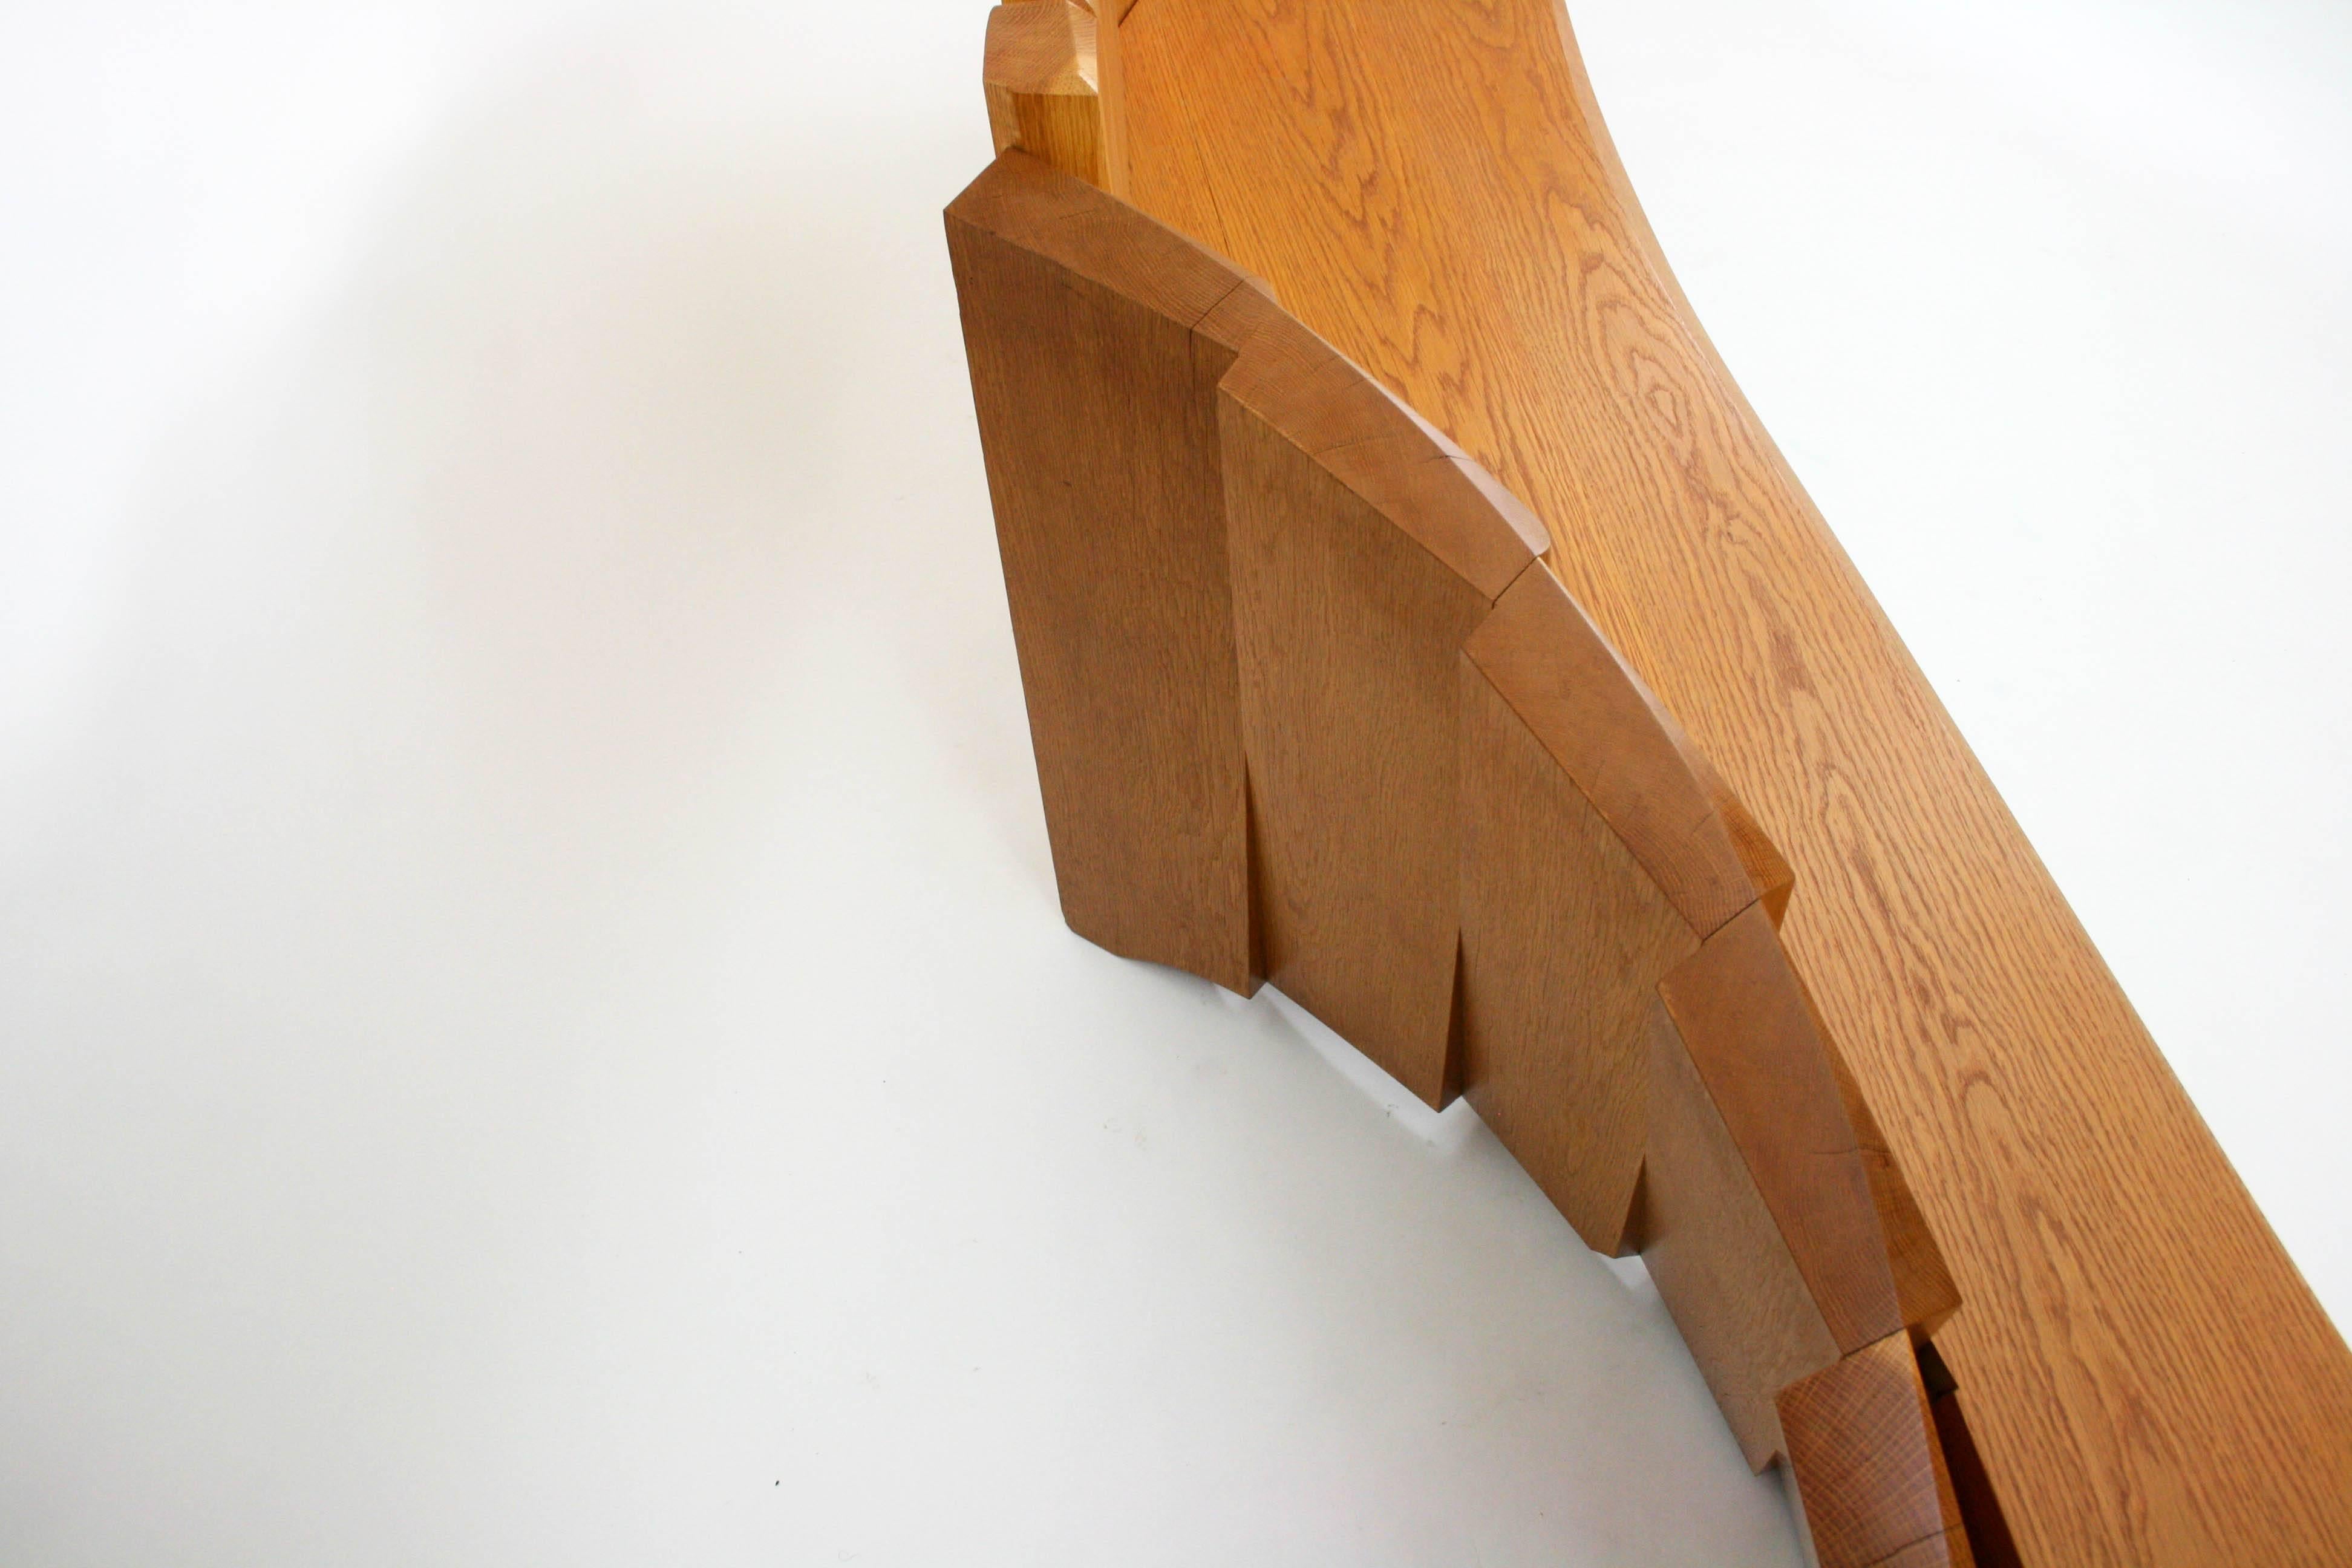 Nico Yektai Studio-Made Sculptural White Oak Bench Signed and Dated by Artist For Sale 2